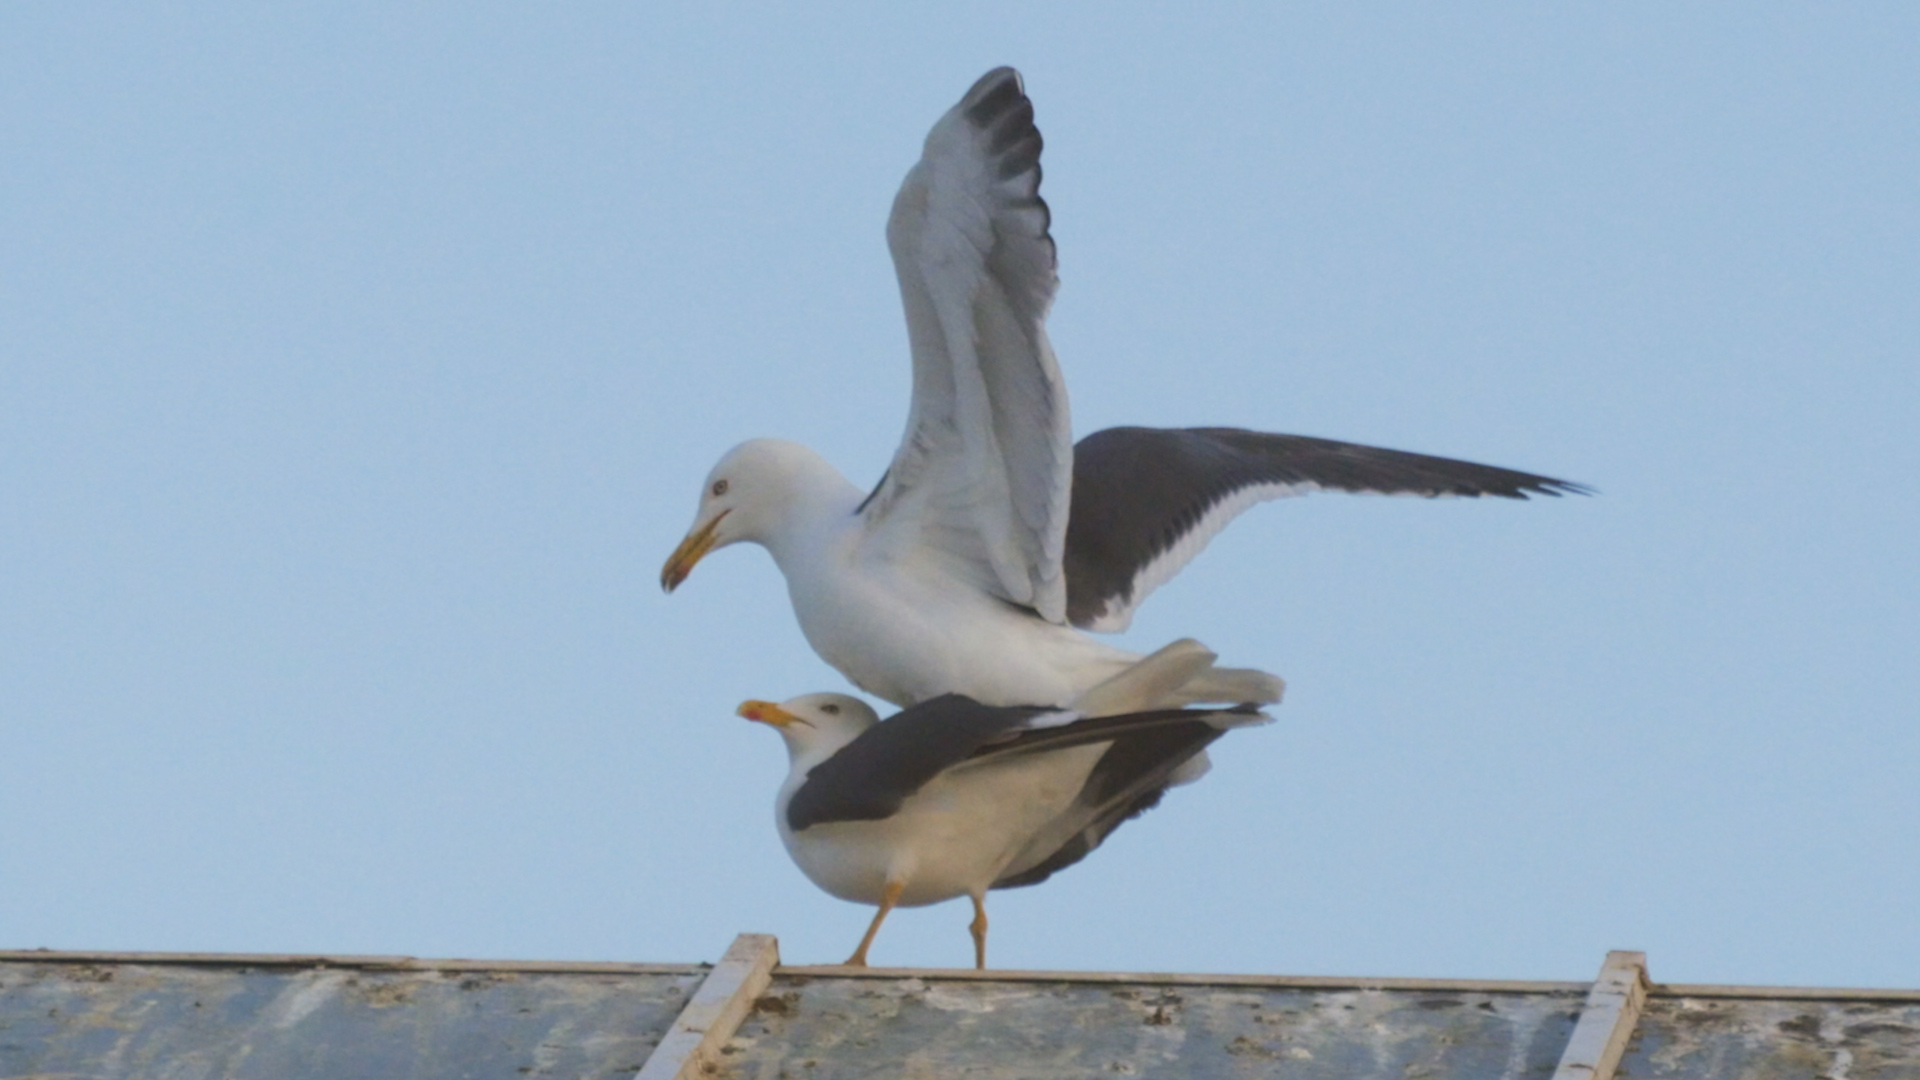 For Seagulls, Mating Is a Balancing Act